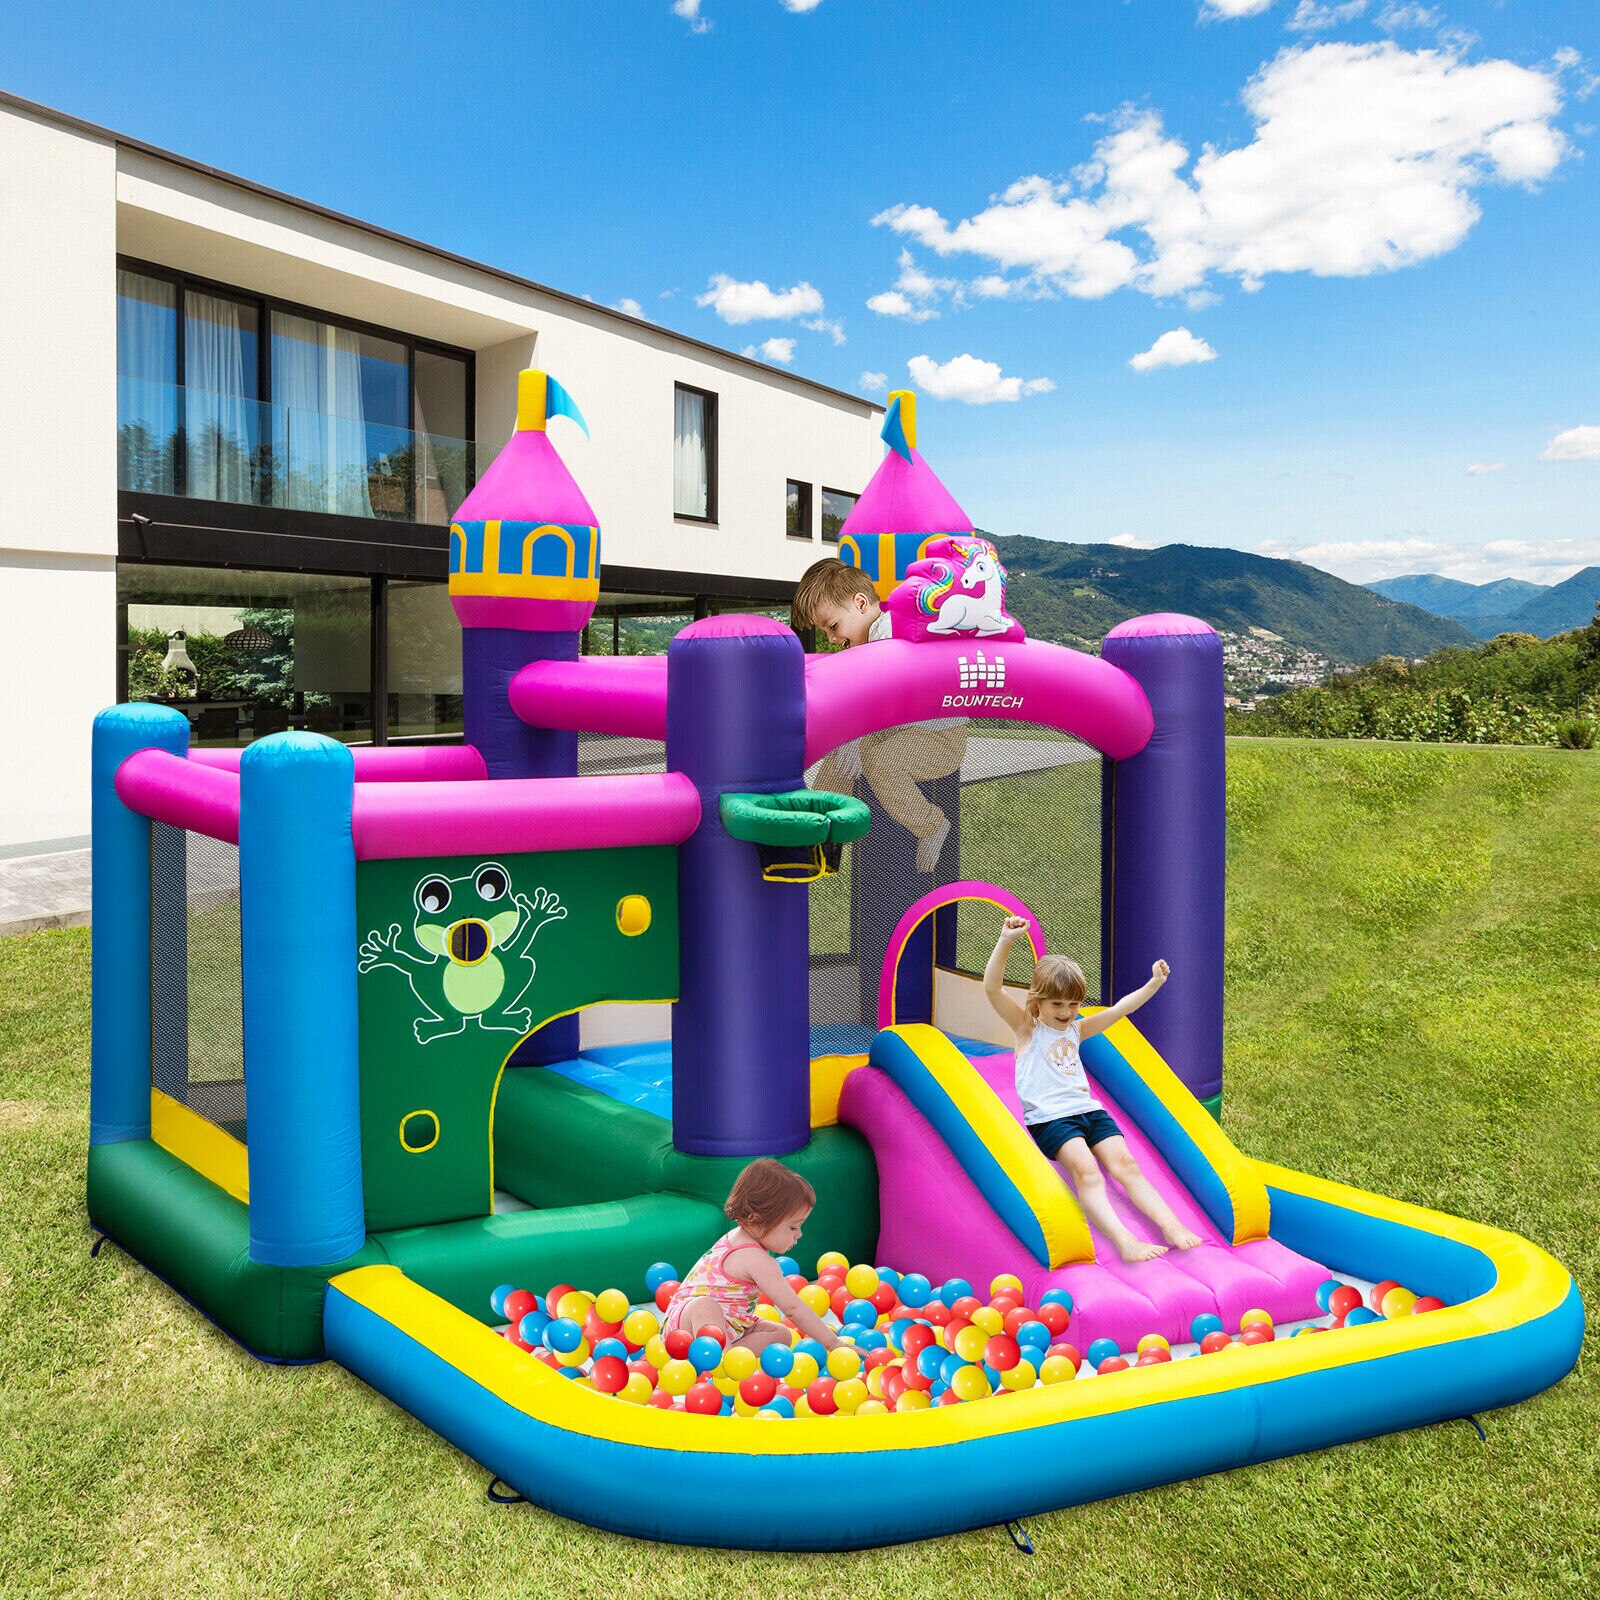 Babyjoy-Inflatable-Unicorn-themed-Bounce-House-6-in-1-Kids-Bounce-Castle-W-735W-Blower-3